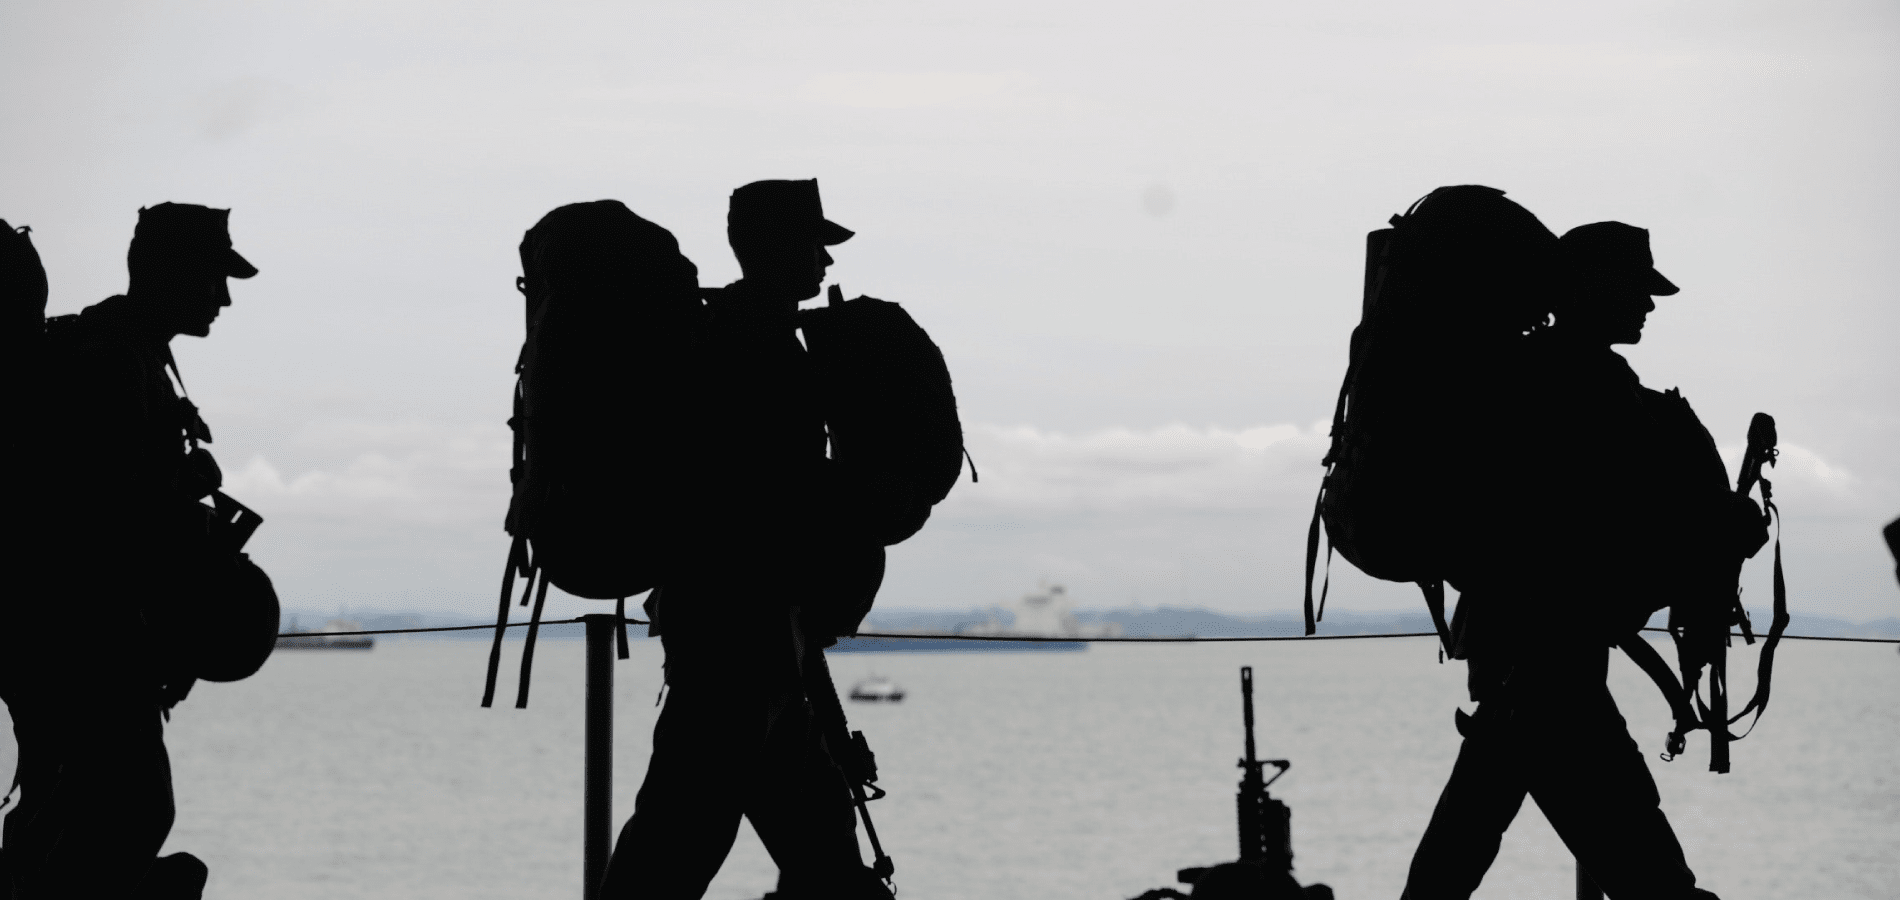 Silhouette of three army members with backpacks